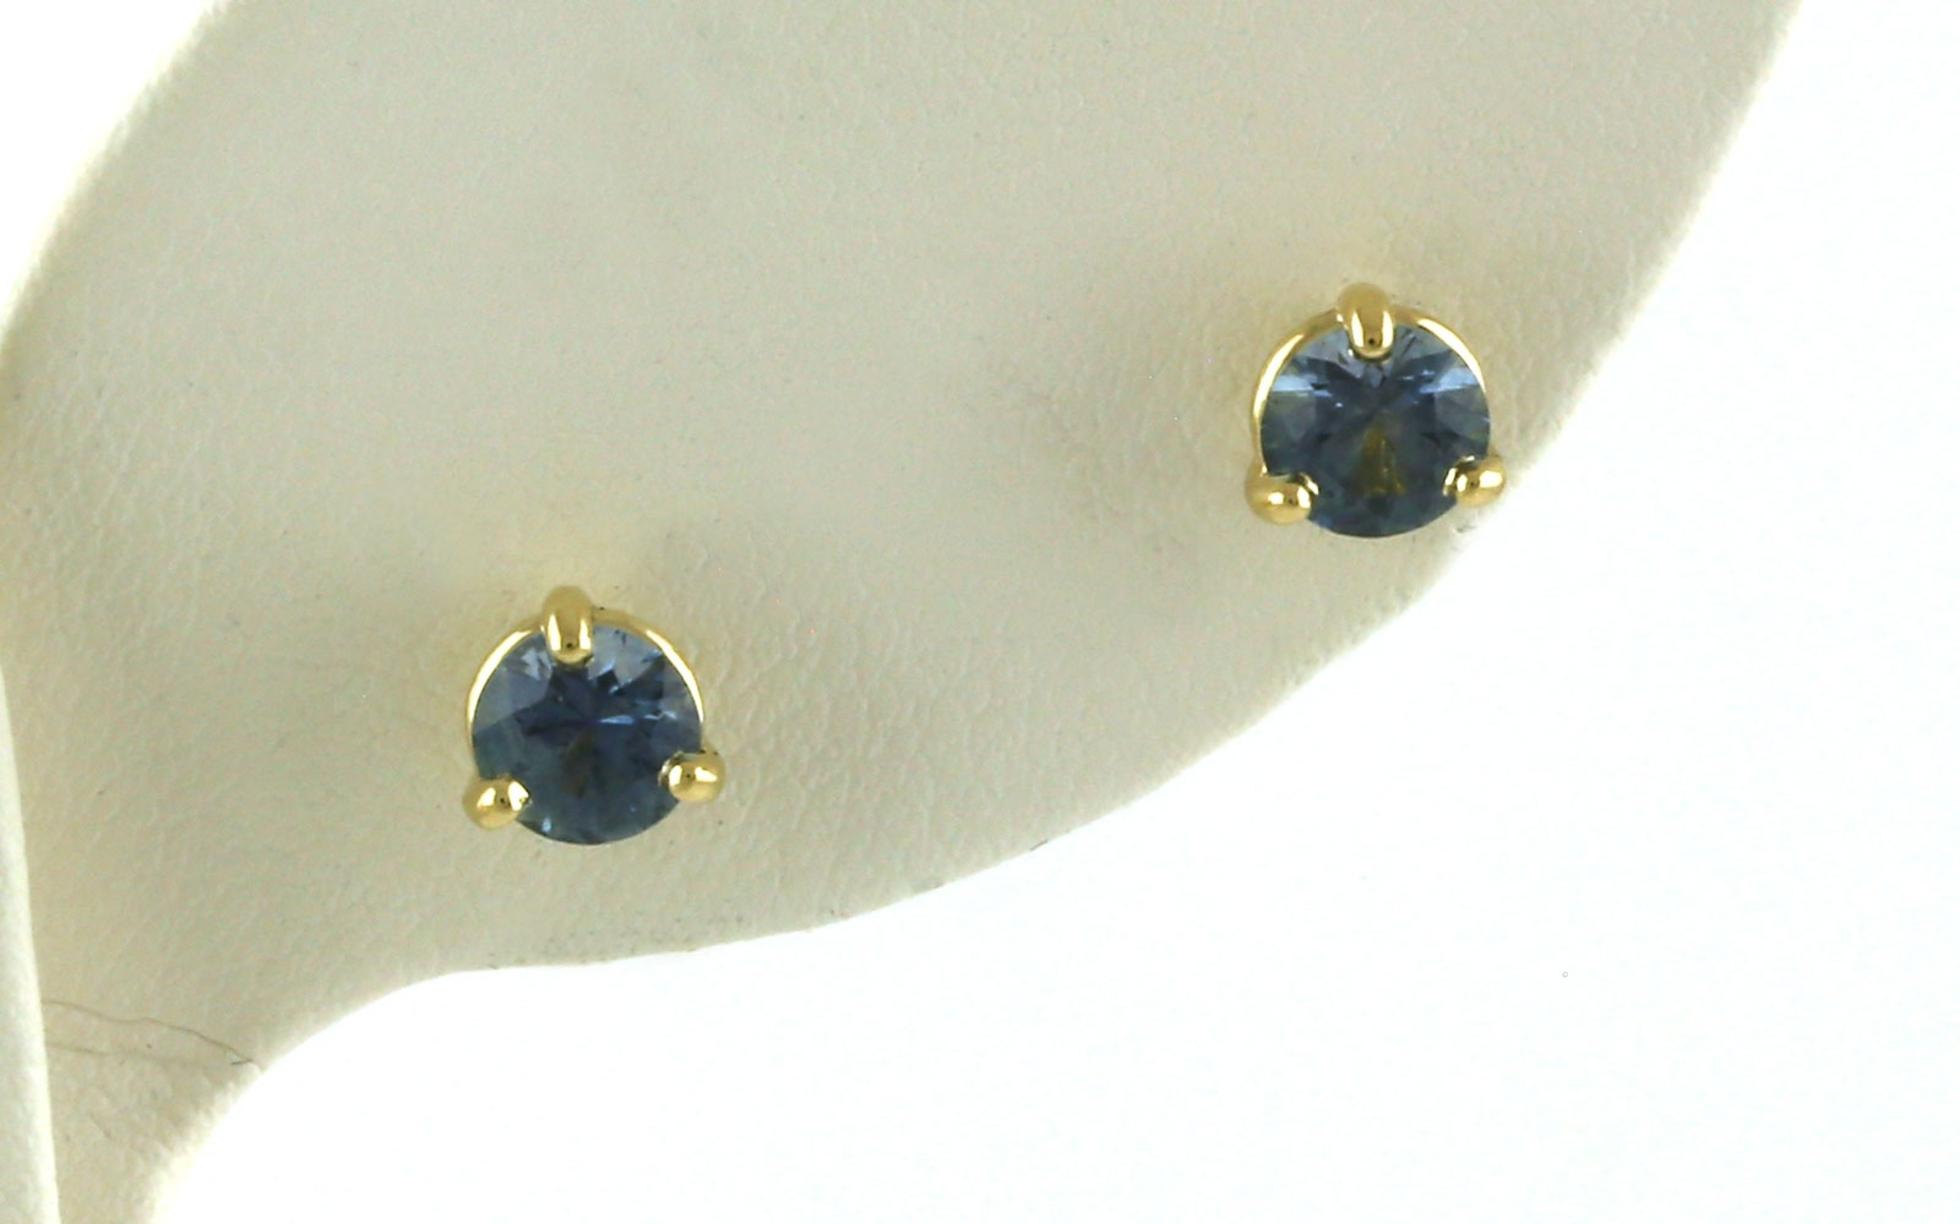 Montana Sapphire Stud Earrings in 3-Prong Martini Settings in Yellow Gold (1.07cts TWT)